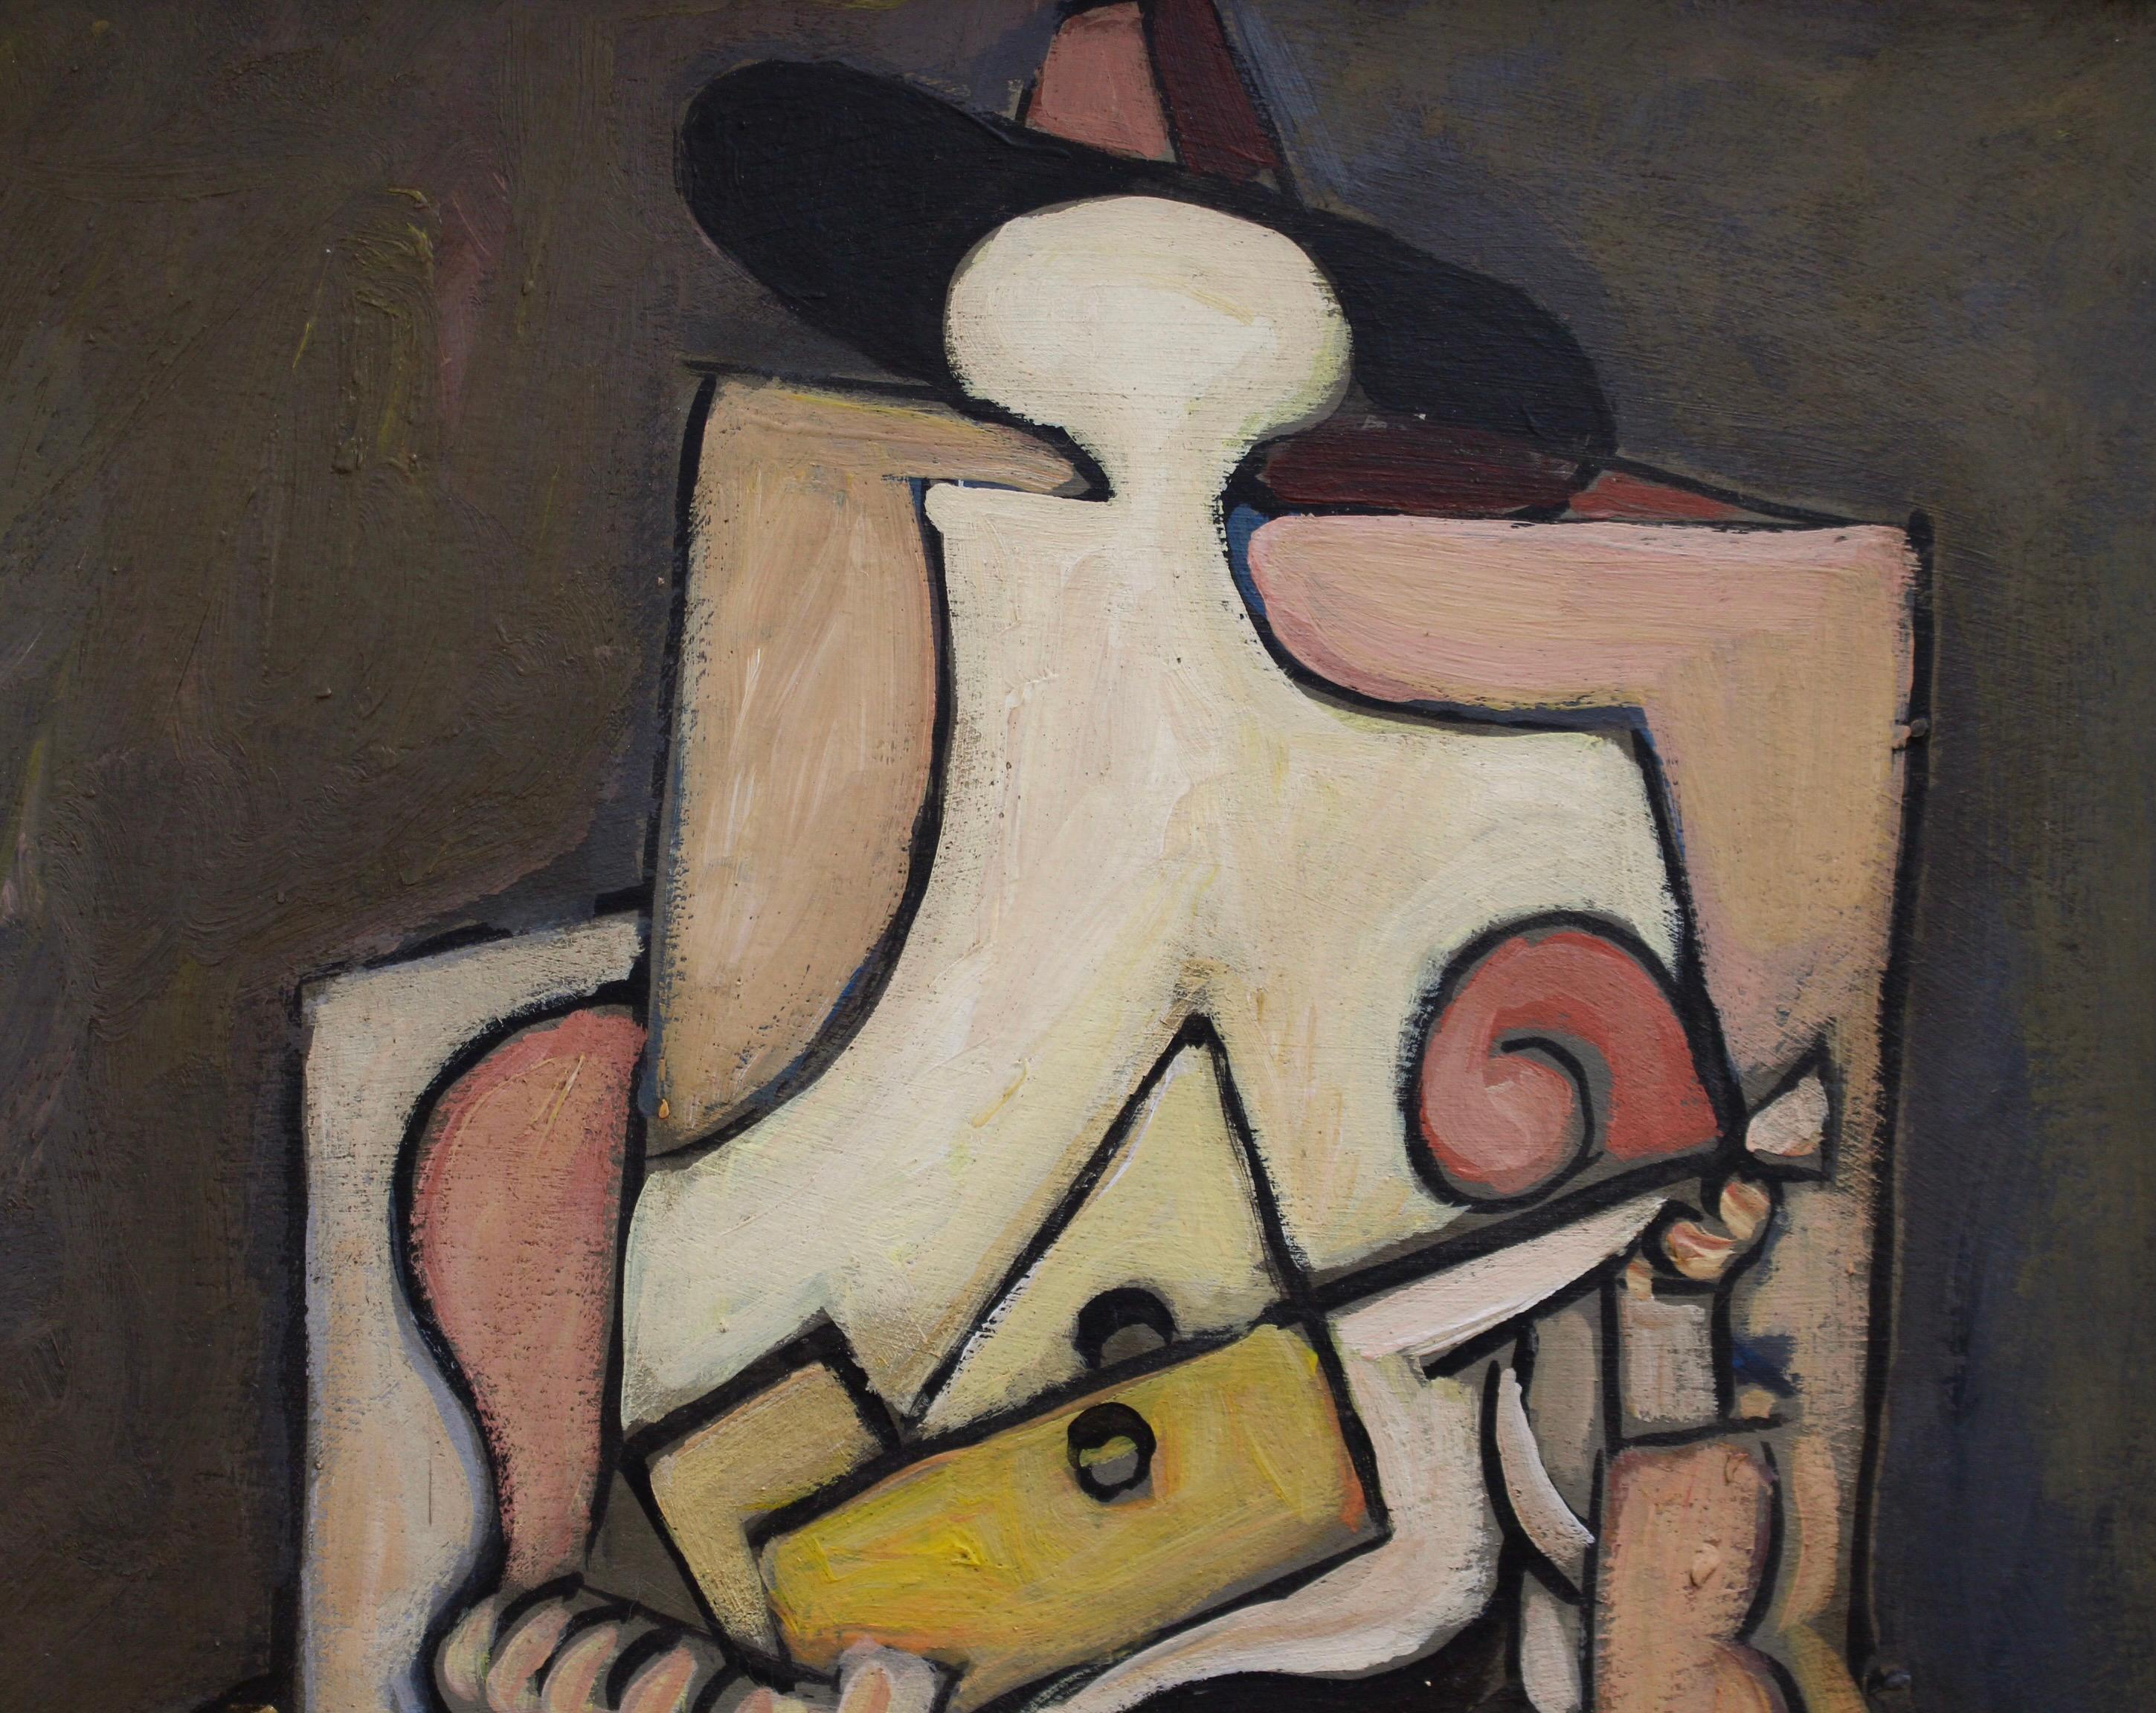 'Guitarist in Wide-Brimmed Hat', oil on board, Berlin School (circa 1960s - 1970s). Clearly inspired by Georges Braque's (1882-1963) and Juan Gris' (1887- 1927) works, this painting is similar to experimental representations by both Braque as well